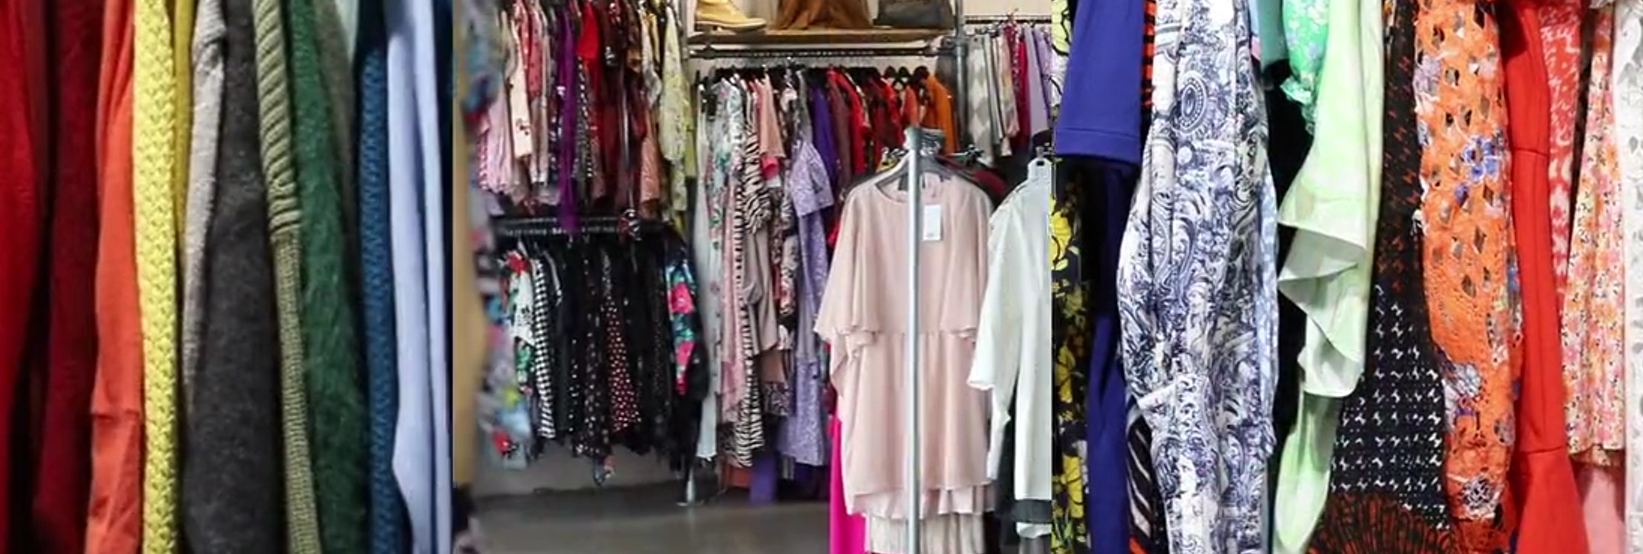 clothes hanging on racks